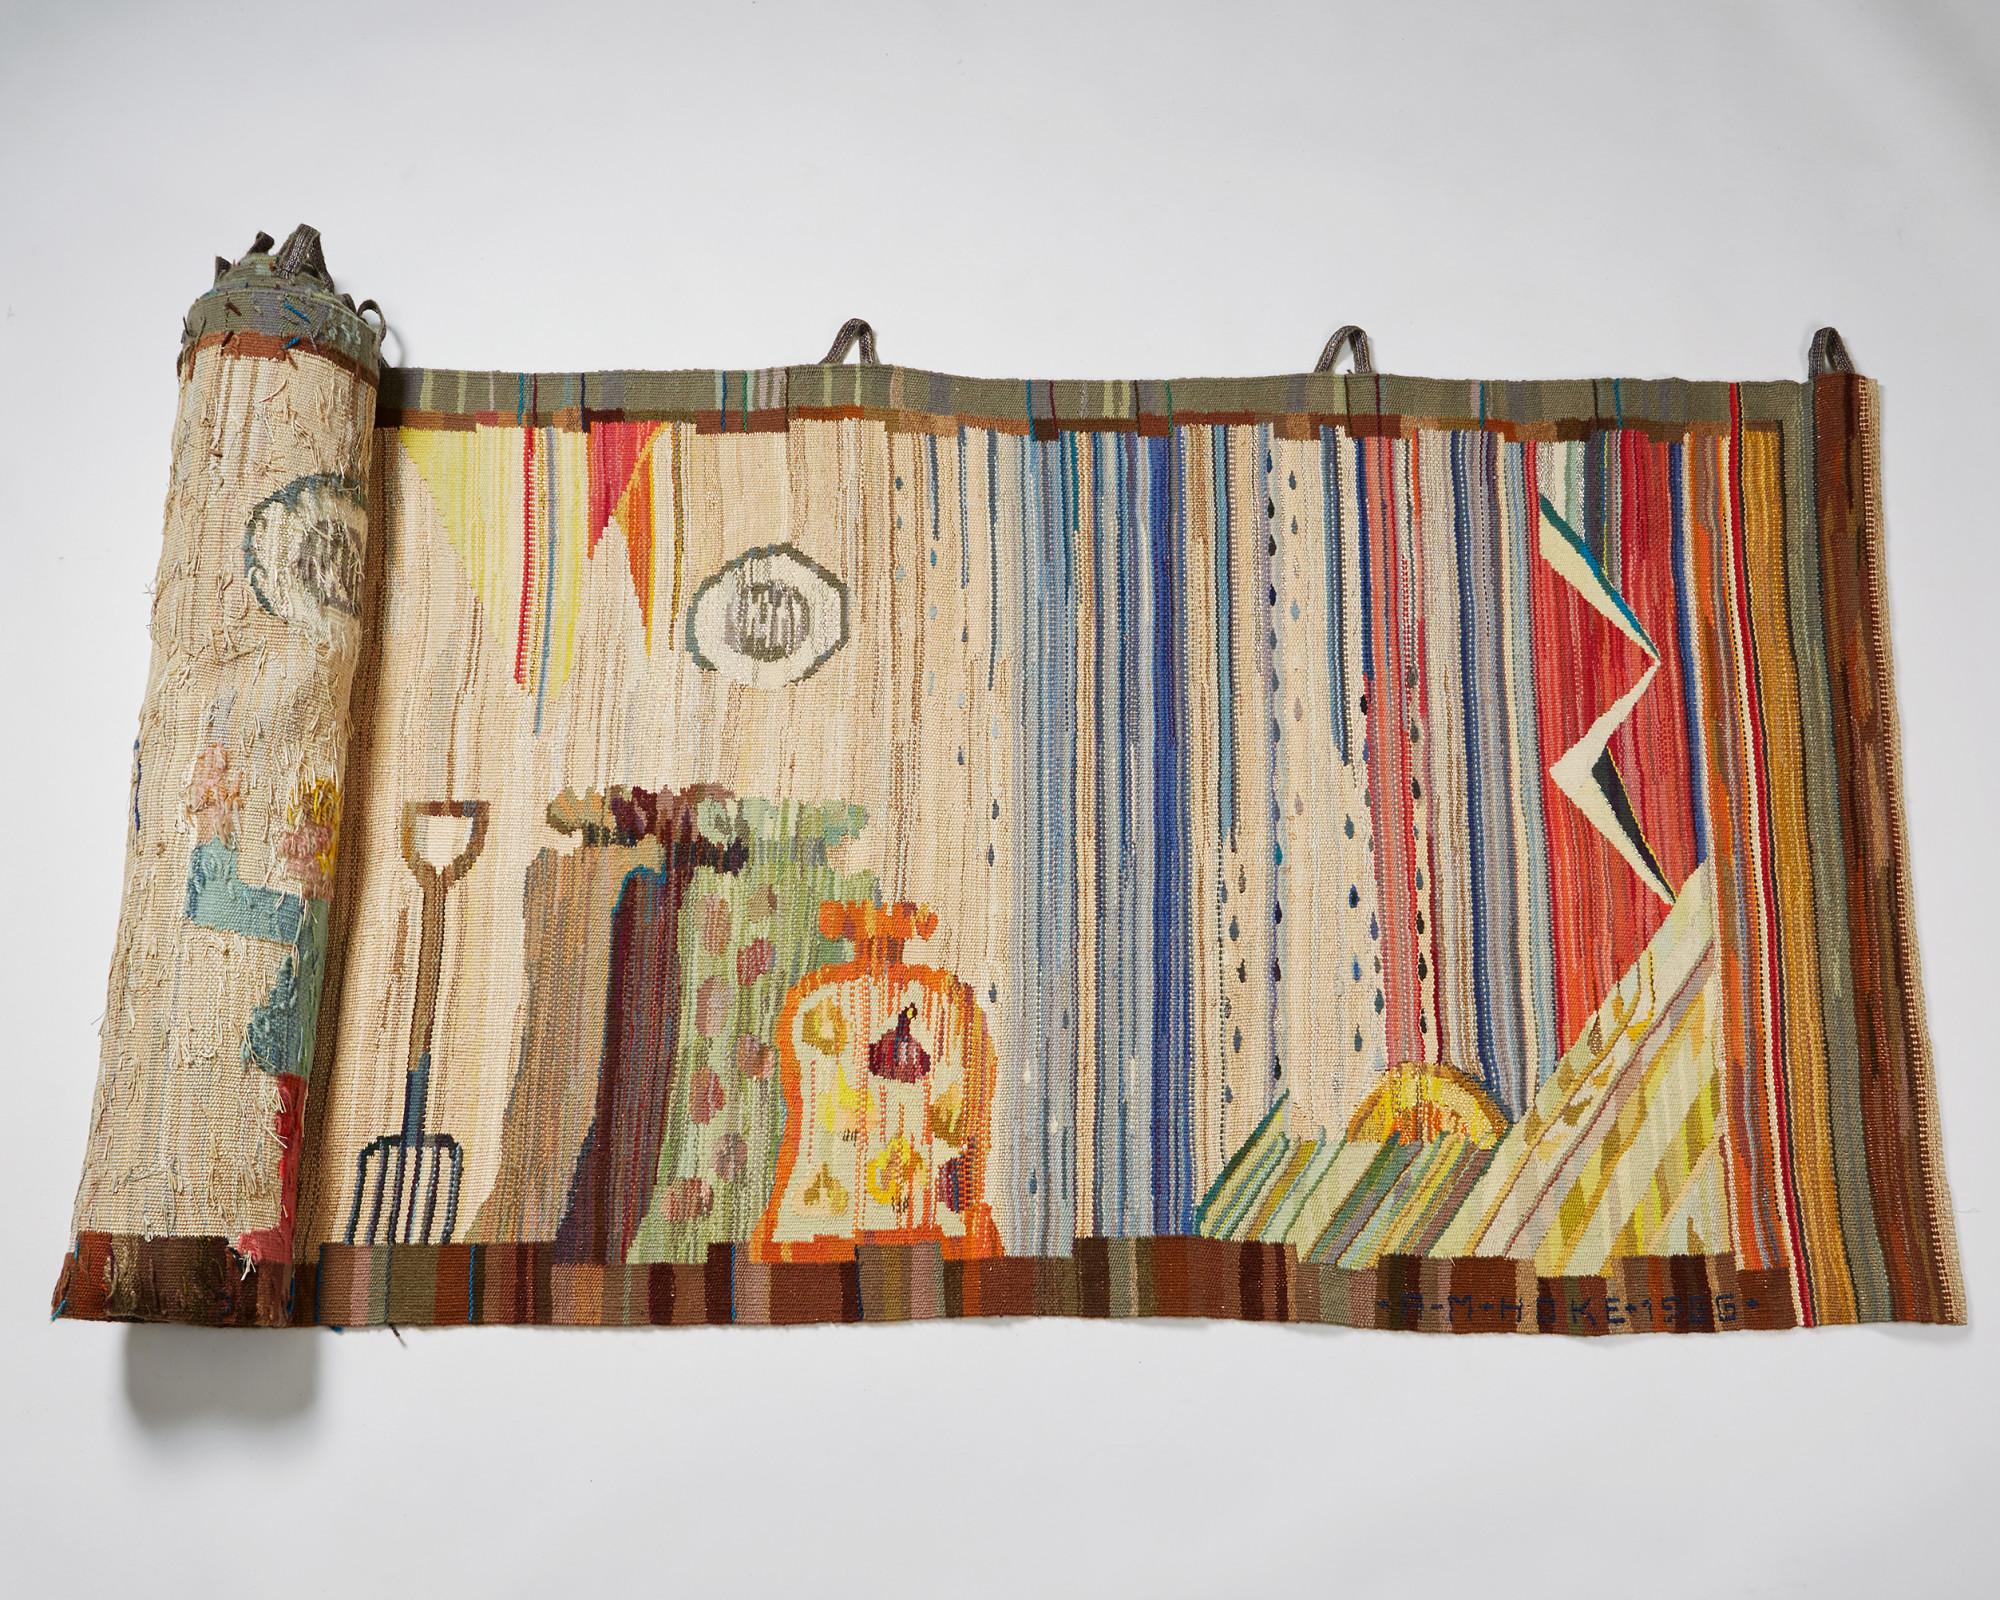 European Tapestry by Anna-Maria Hoke, Sweden, 1966